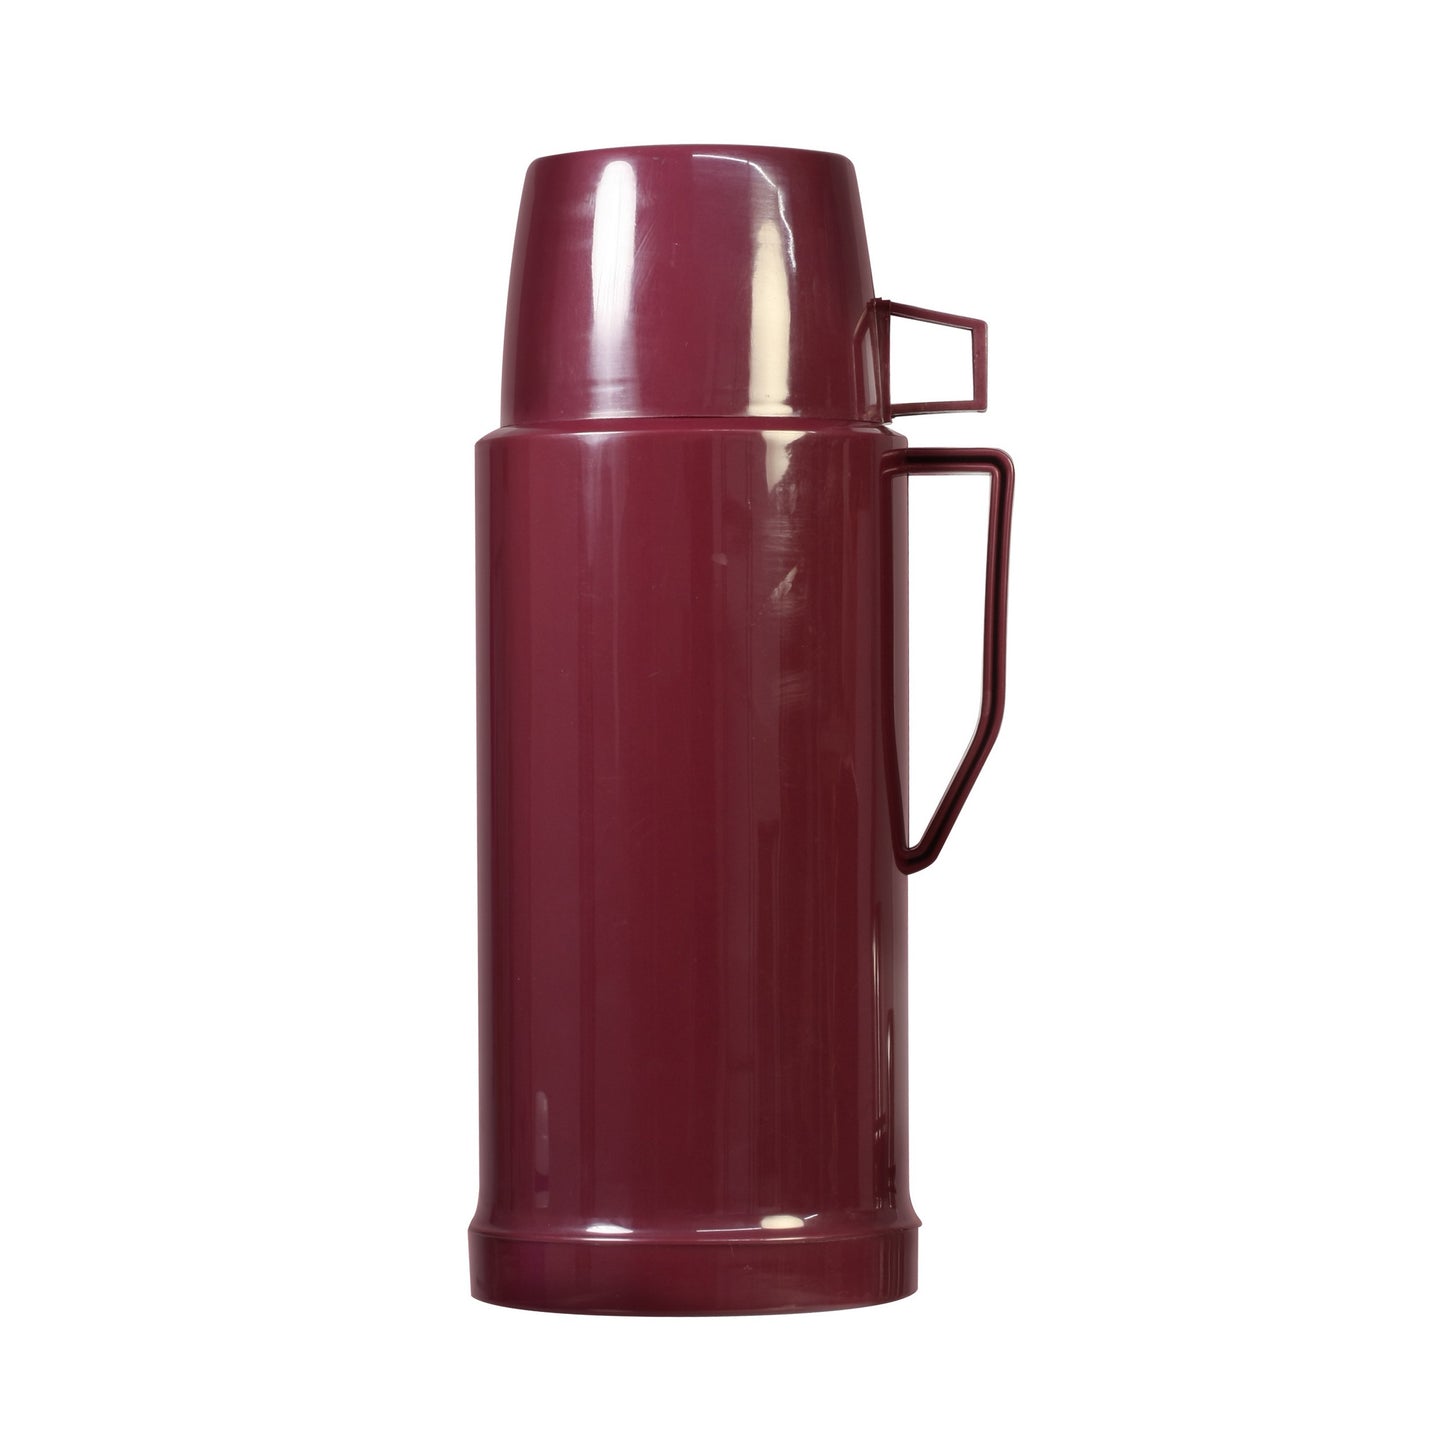 Bene Casa 0.5-liter Capacity Thermos w/ Double Wall Vaccum Insulation